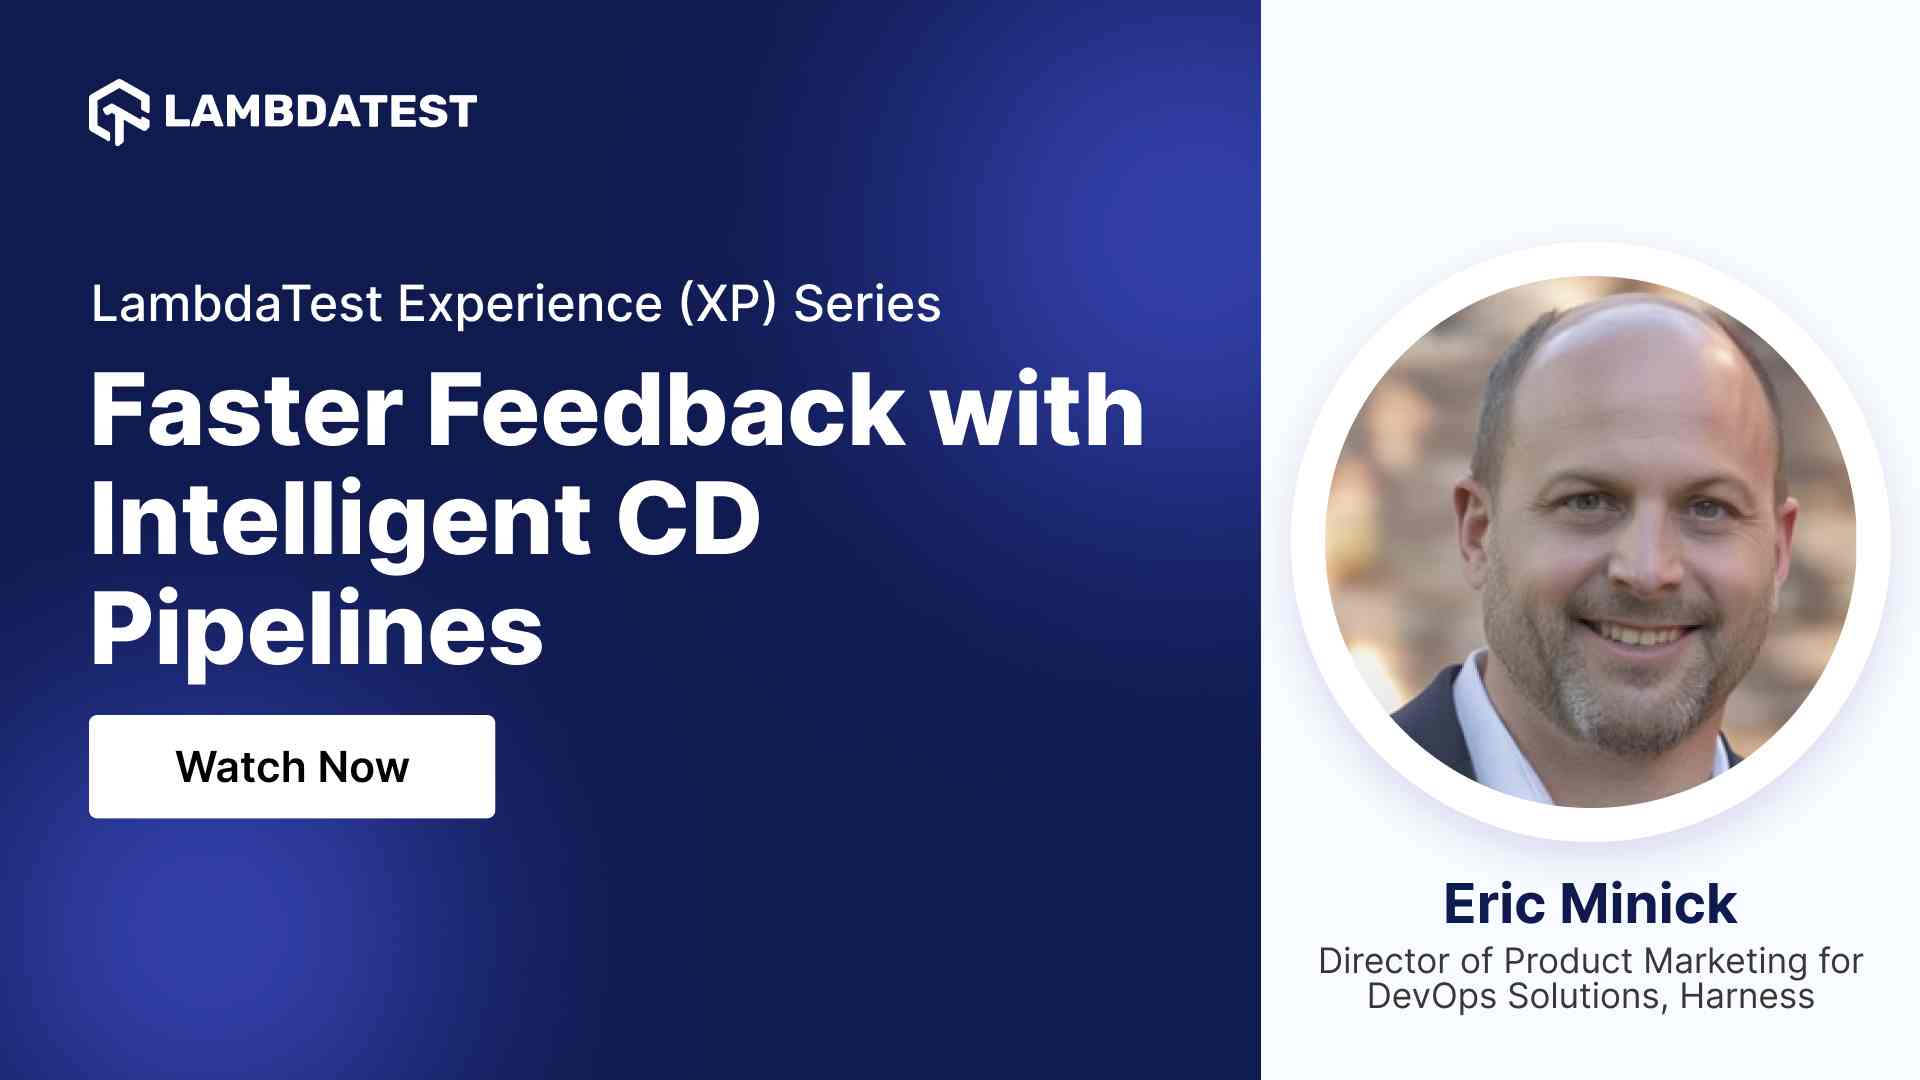 Faster Feedback with Intelligent CD Pipelines